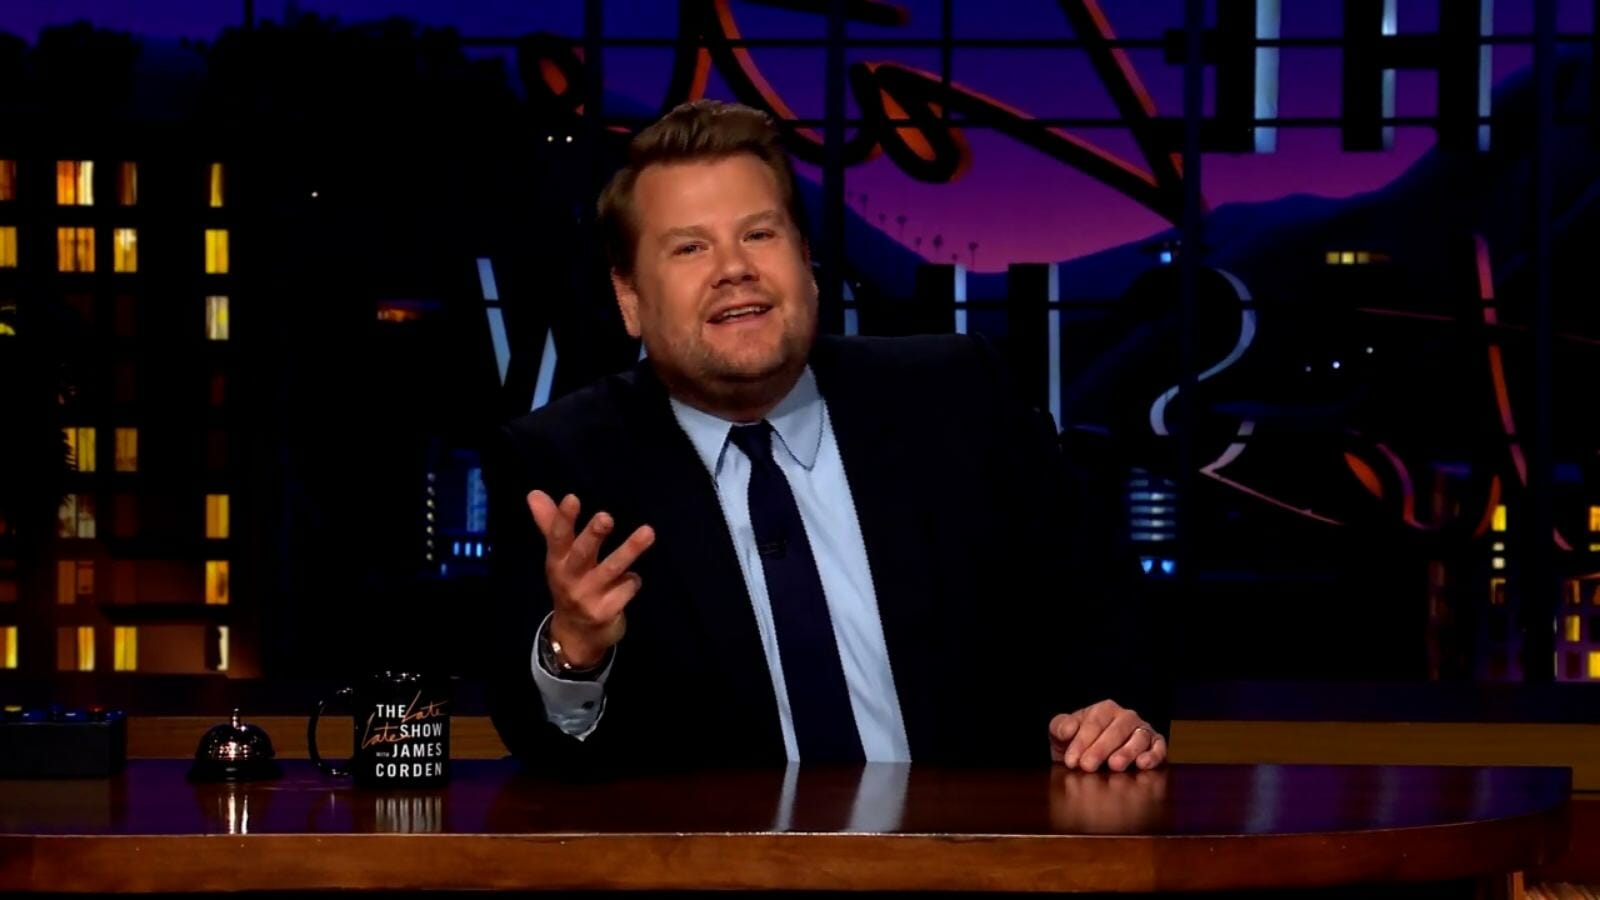 James Corden in his late night talk show